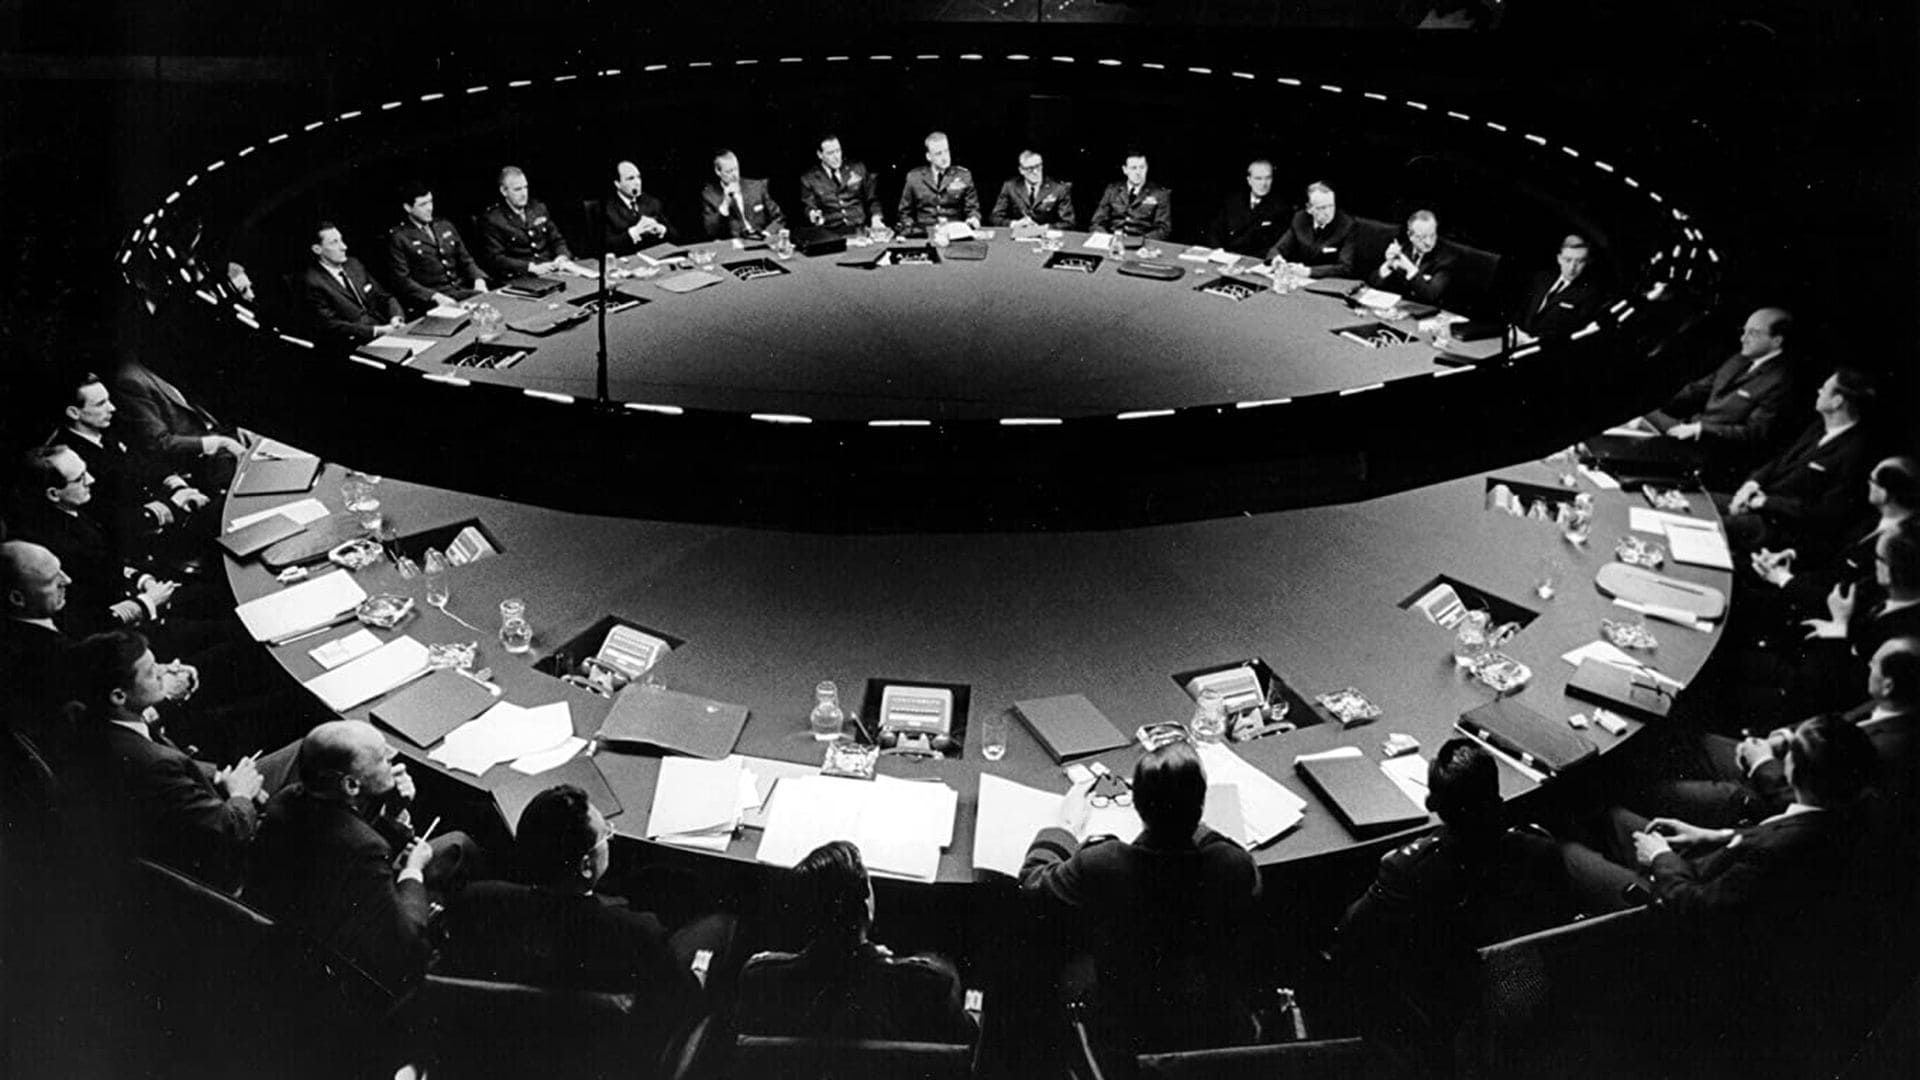 Dr. Strangelove or: How I Learned to Stop Worrying and Love the Bomb Backdrop